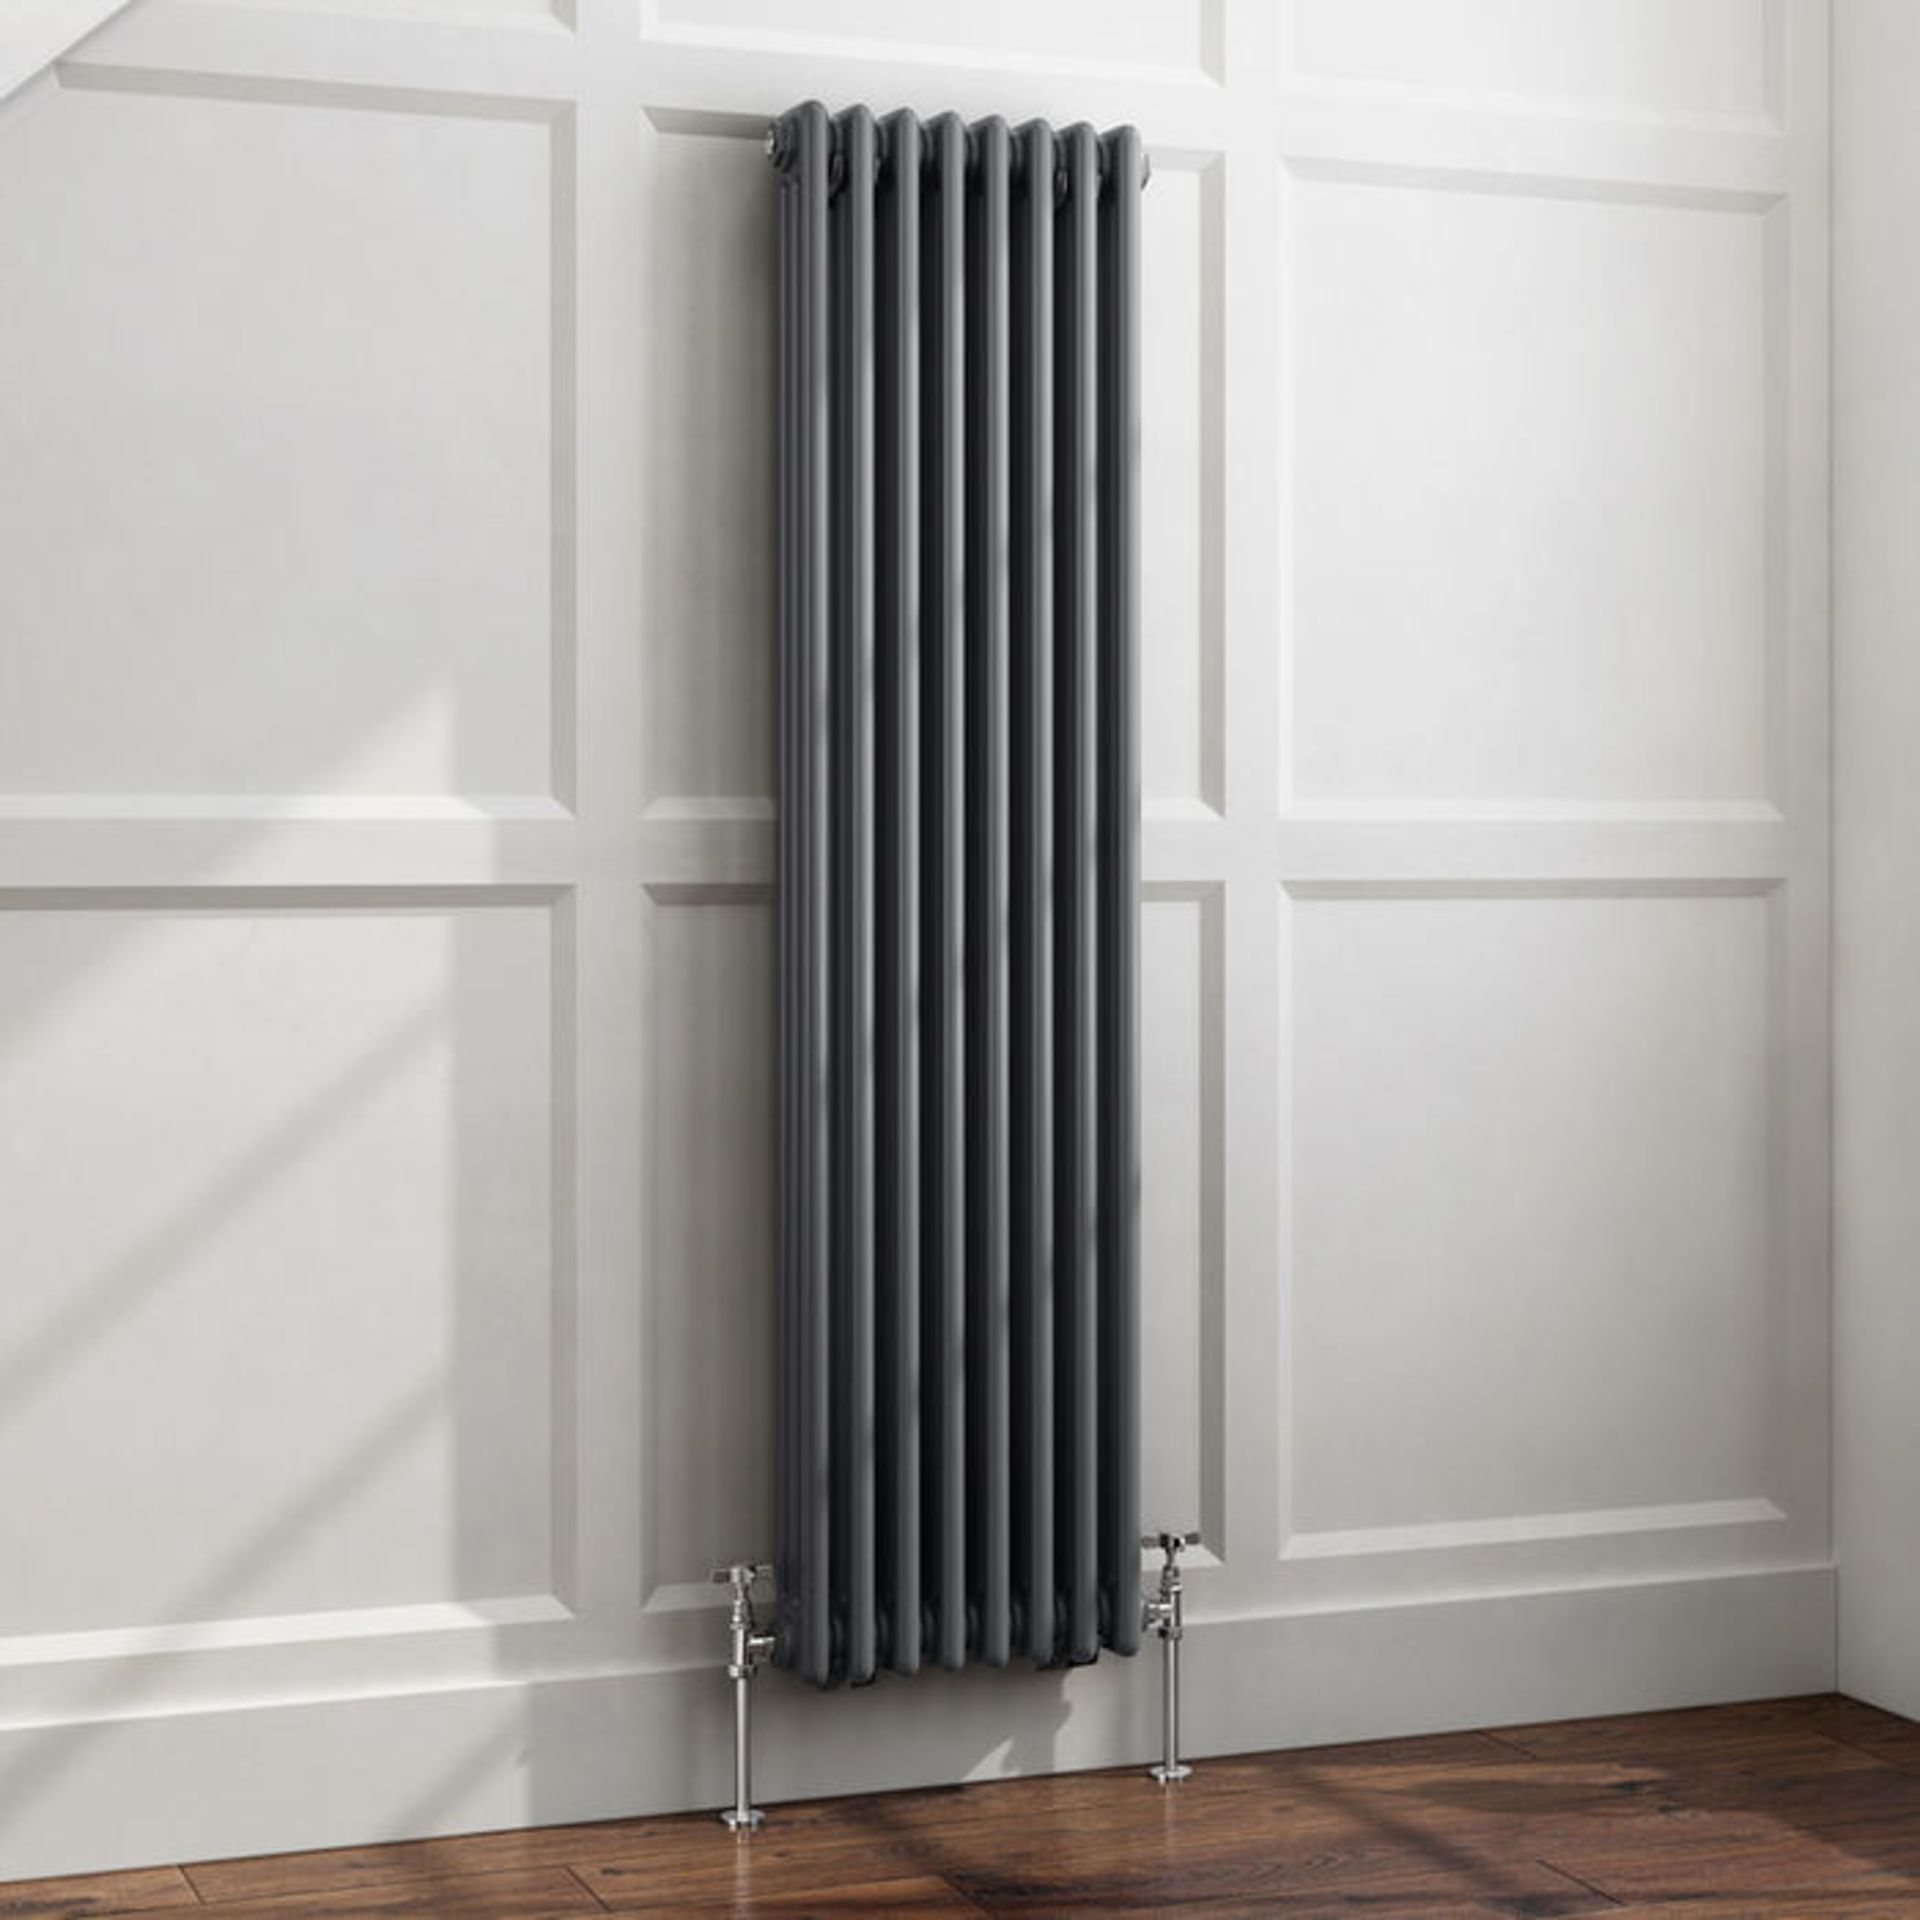 (W114) 1500x380mm Anthracite Triple Panel Vertical Colosseum Traditional Radiator. RRP £399.99. Made - Image 2 of 4